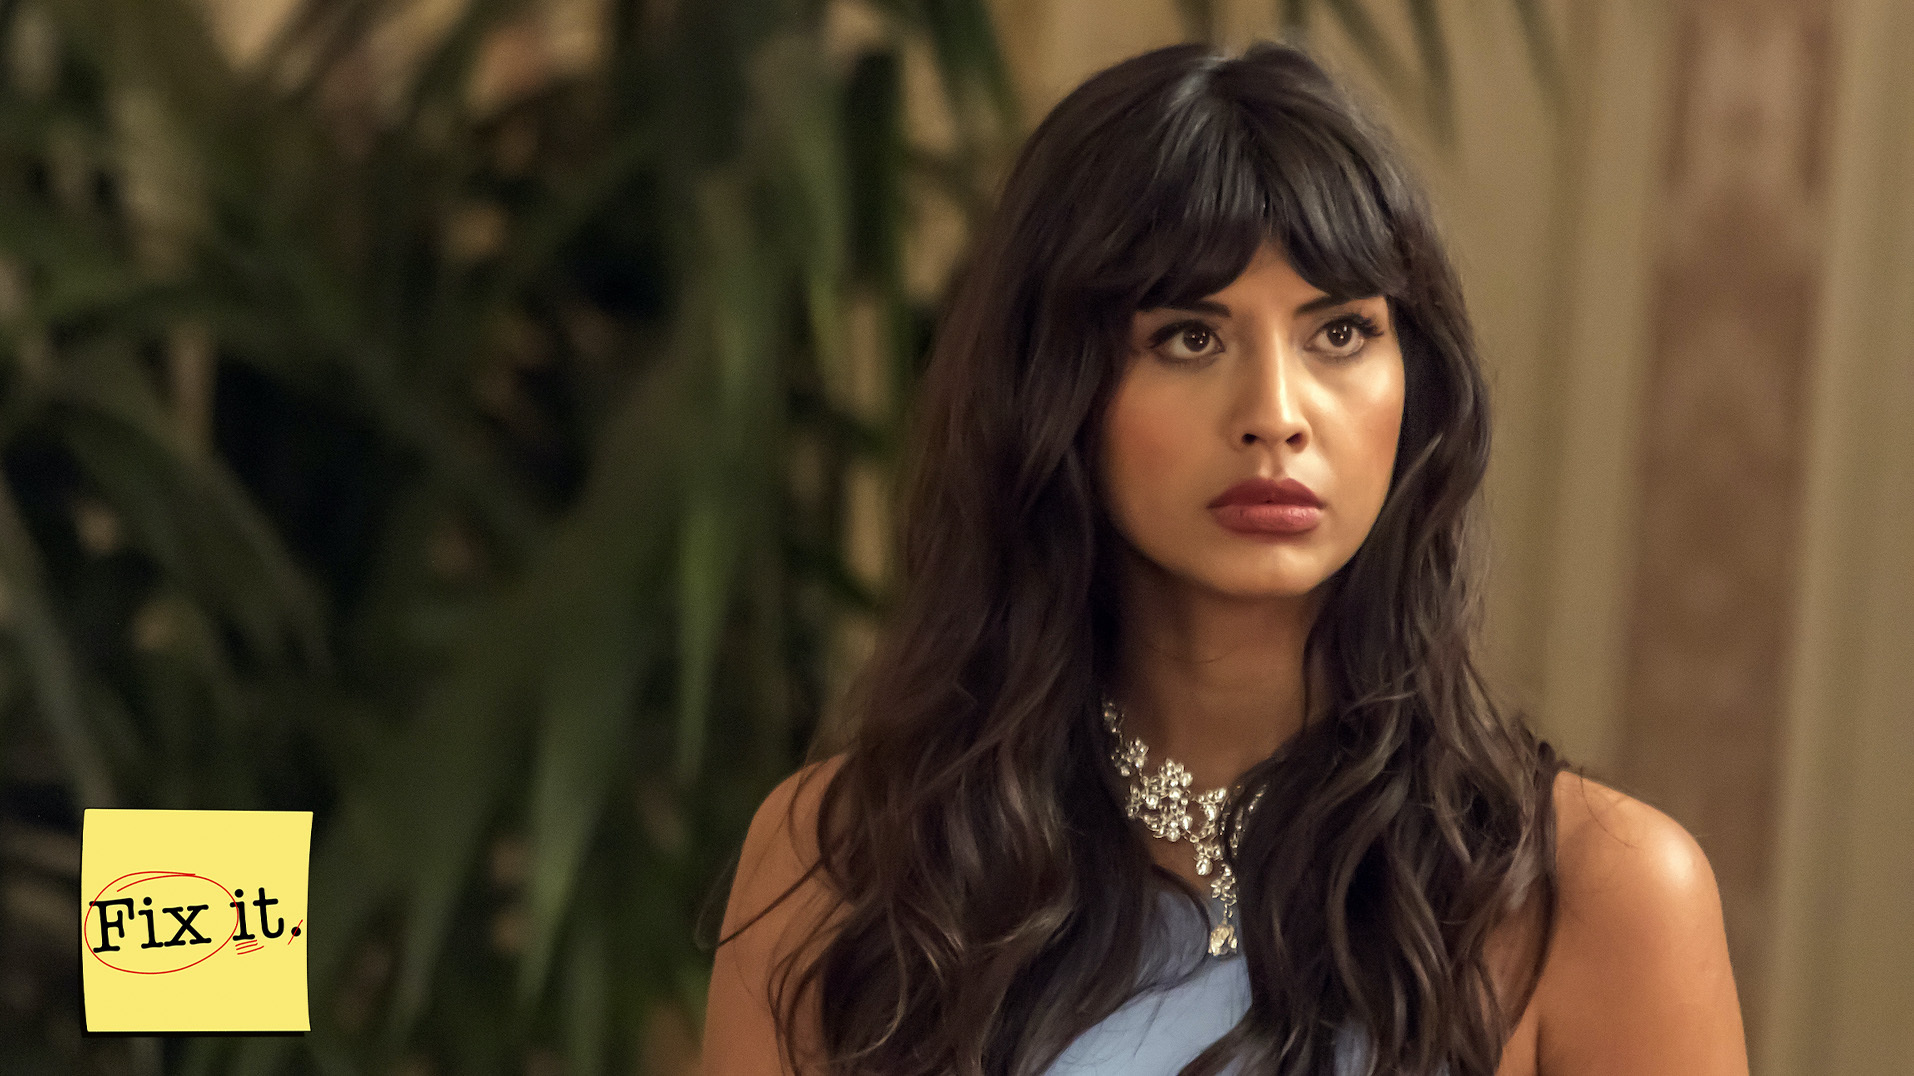 Tahani would have known better.